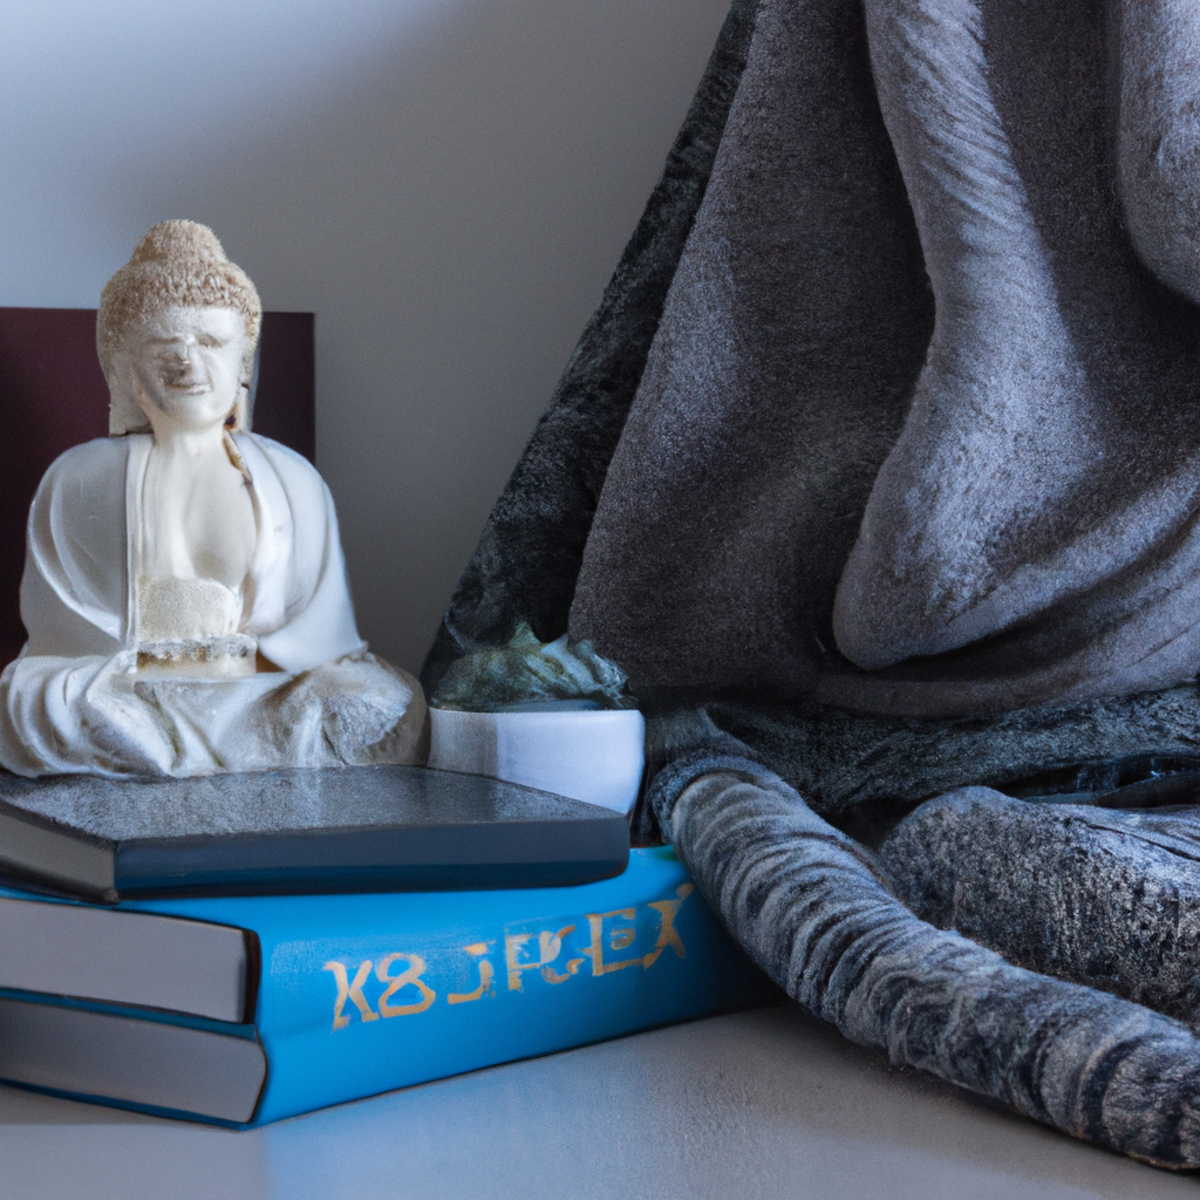 A serene meditation space with essential oil diffuser, salt lamp, books, and nature elements for stress relief.